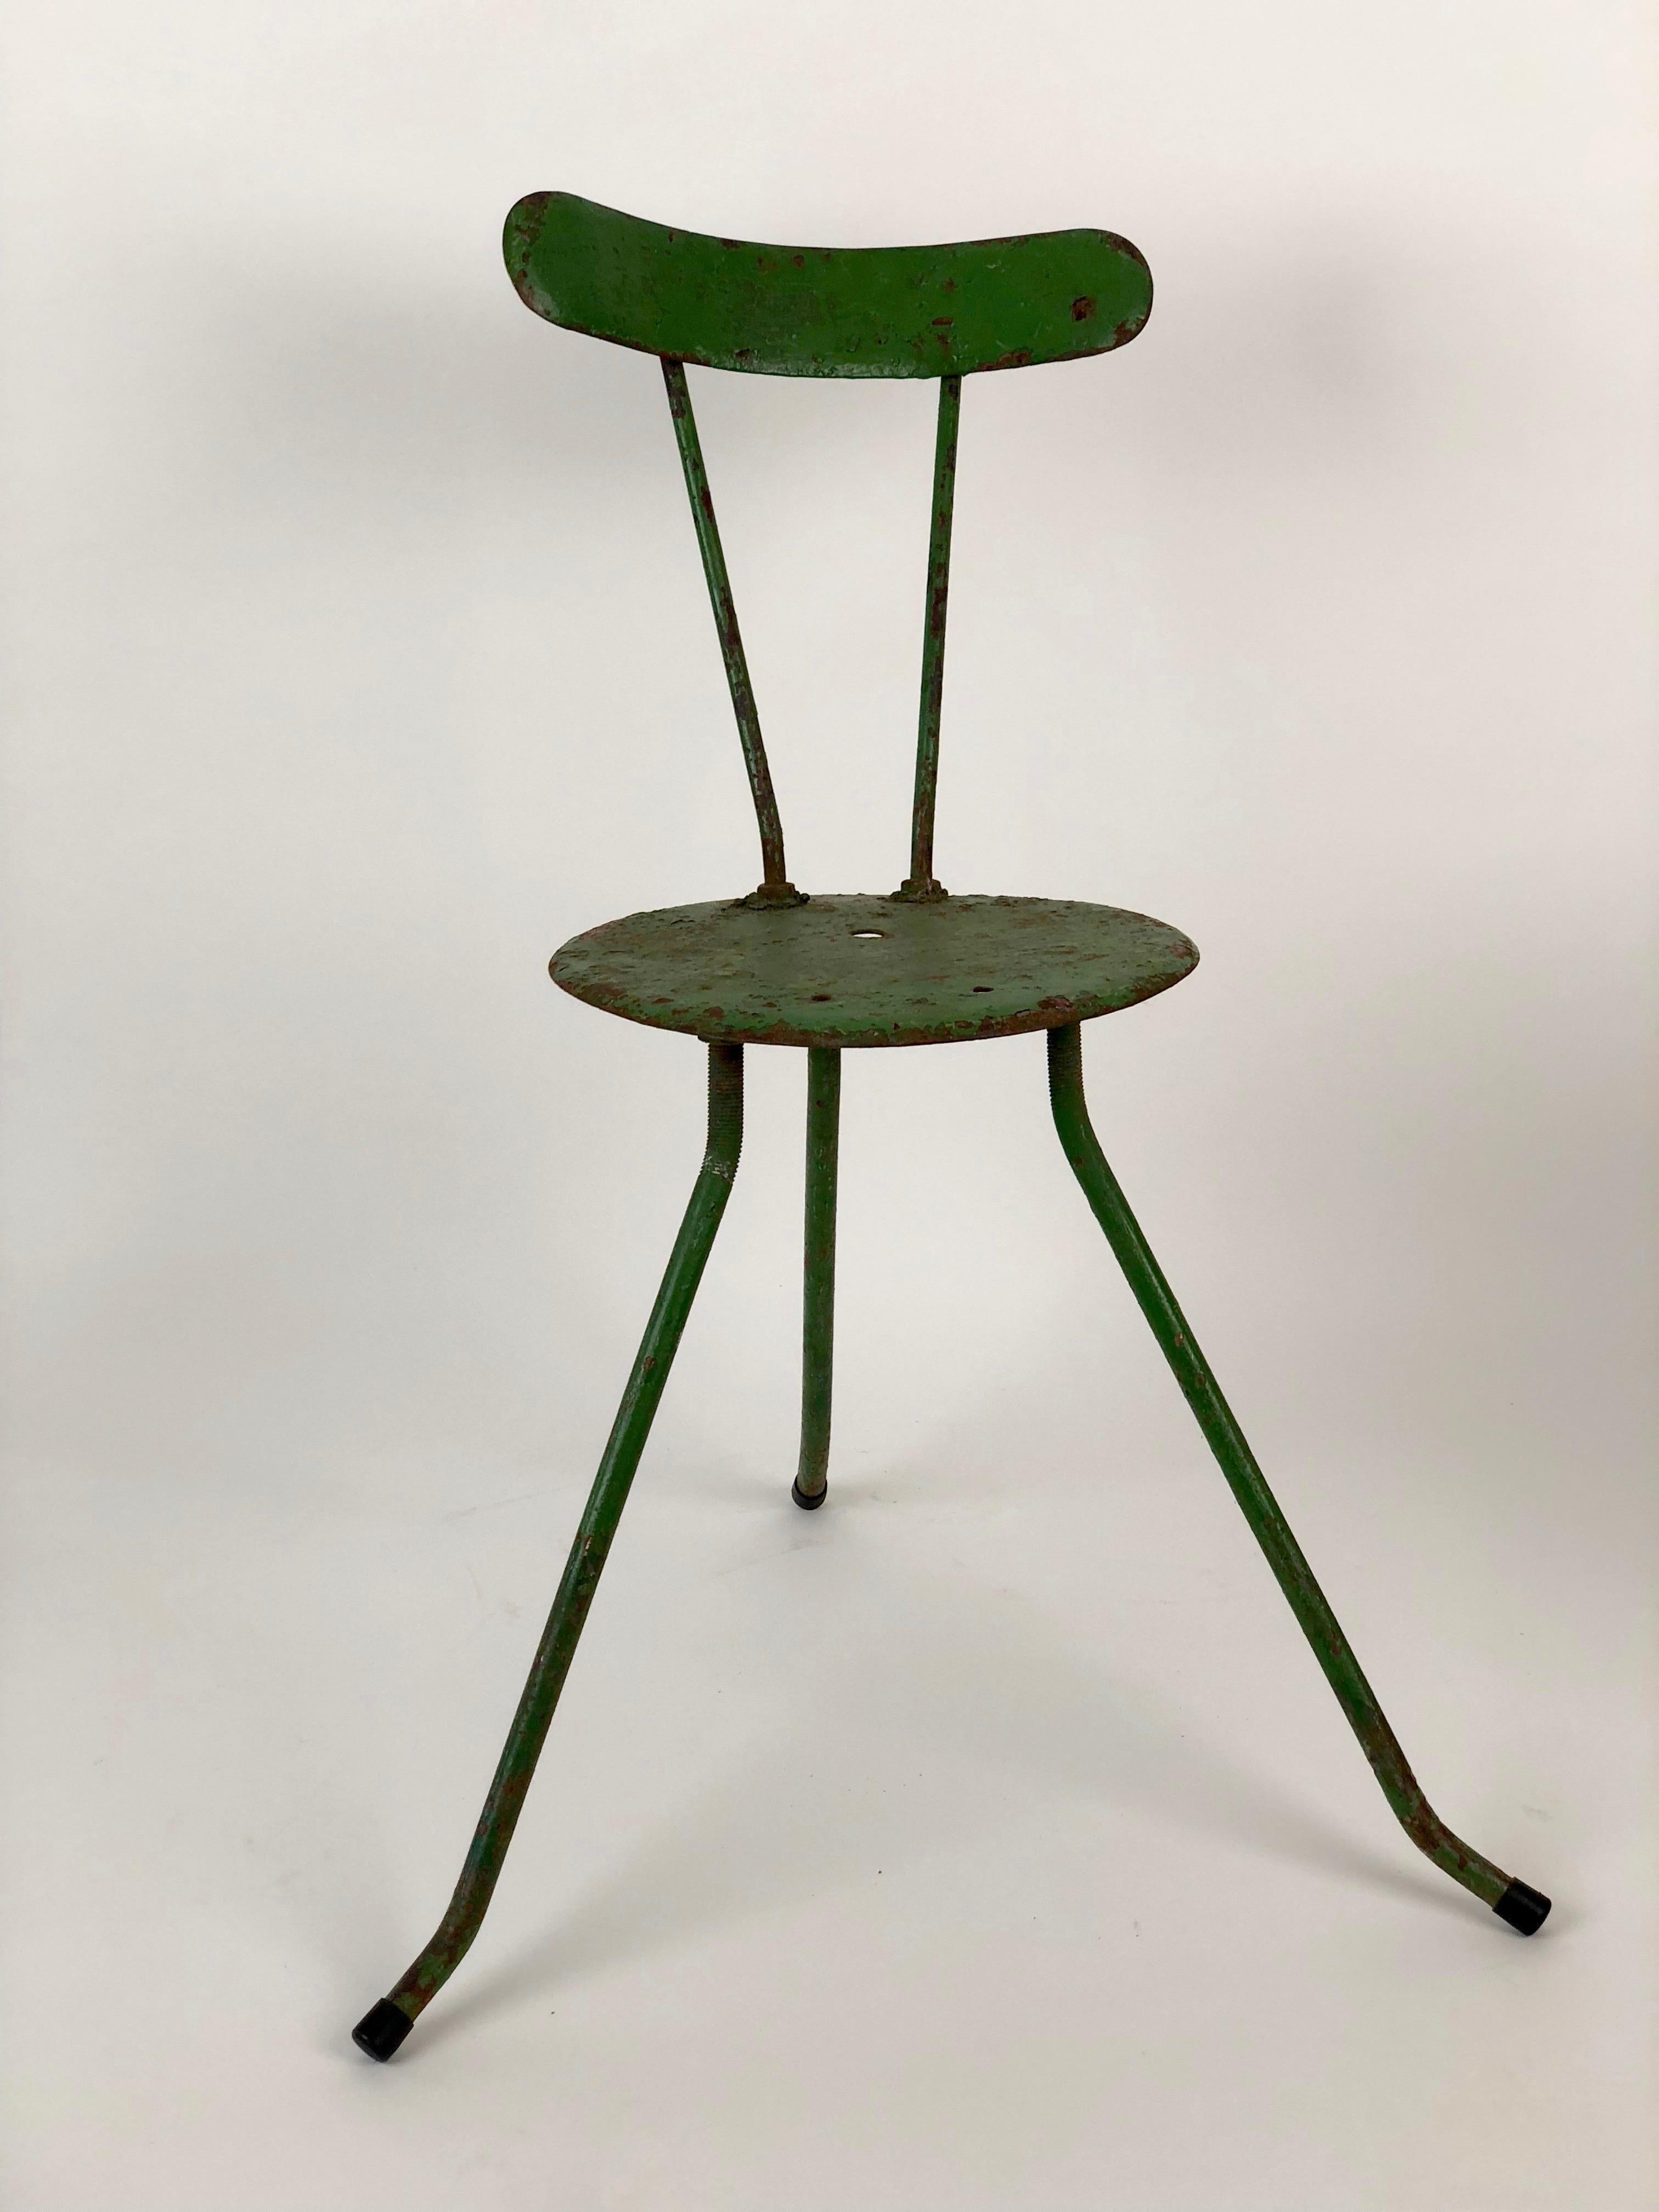 These unique metal chairs come from Balaton Lake Region in Hungary. Composed of found materials, welded together and painted green.
They were originally made for the beach. You pushed the feet into the sand, which provided stability. I have tried